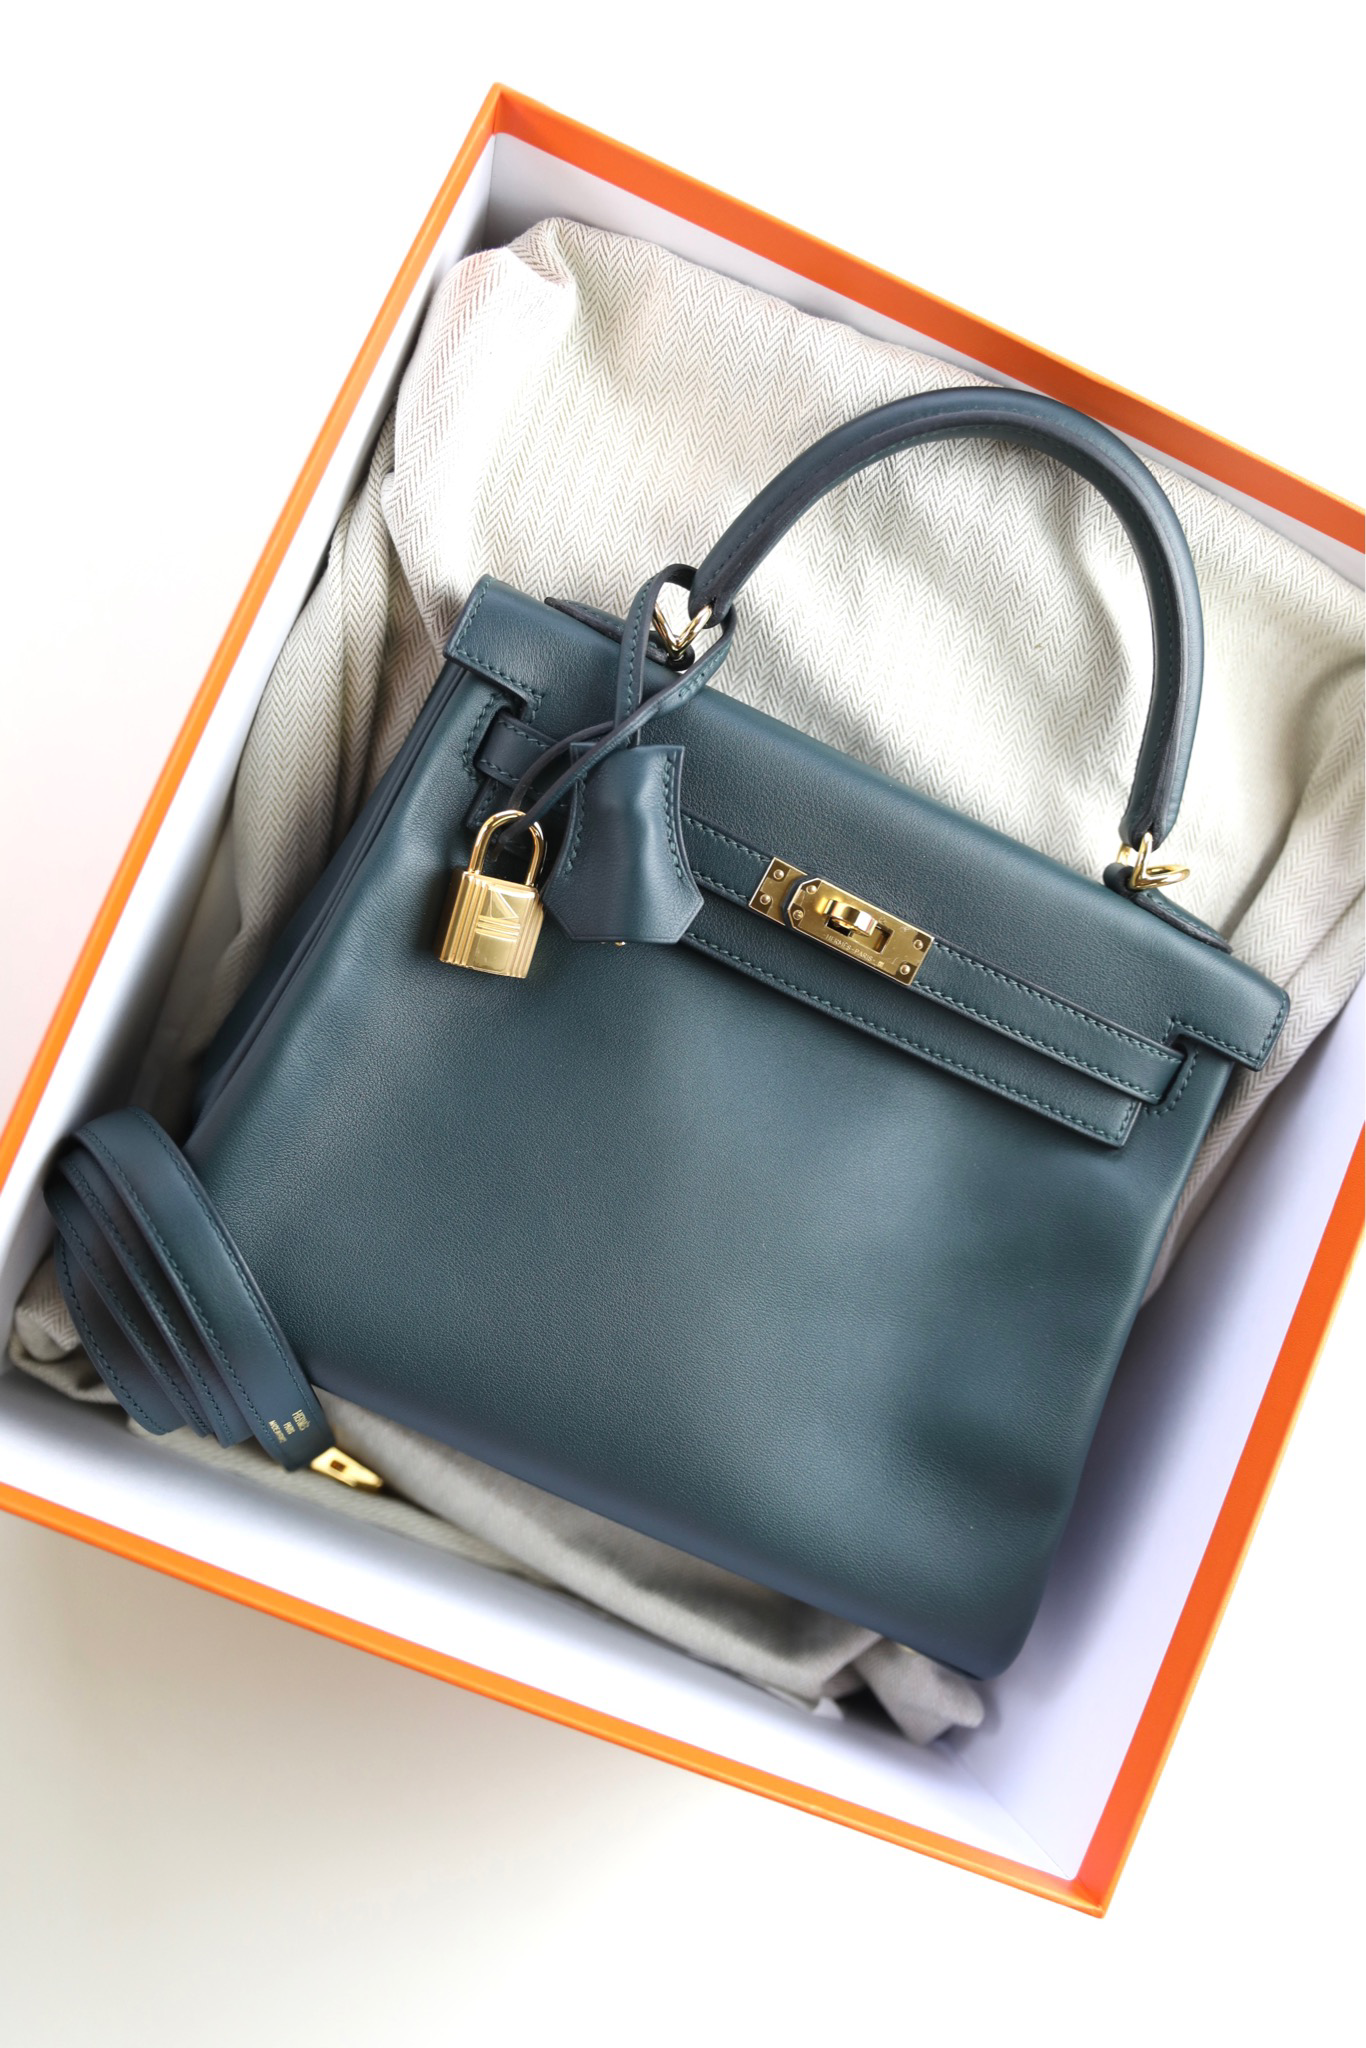 Hermès exotic Kelly 25 Cypress vert. Available immediately for